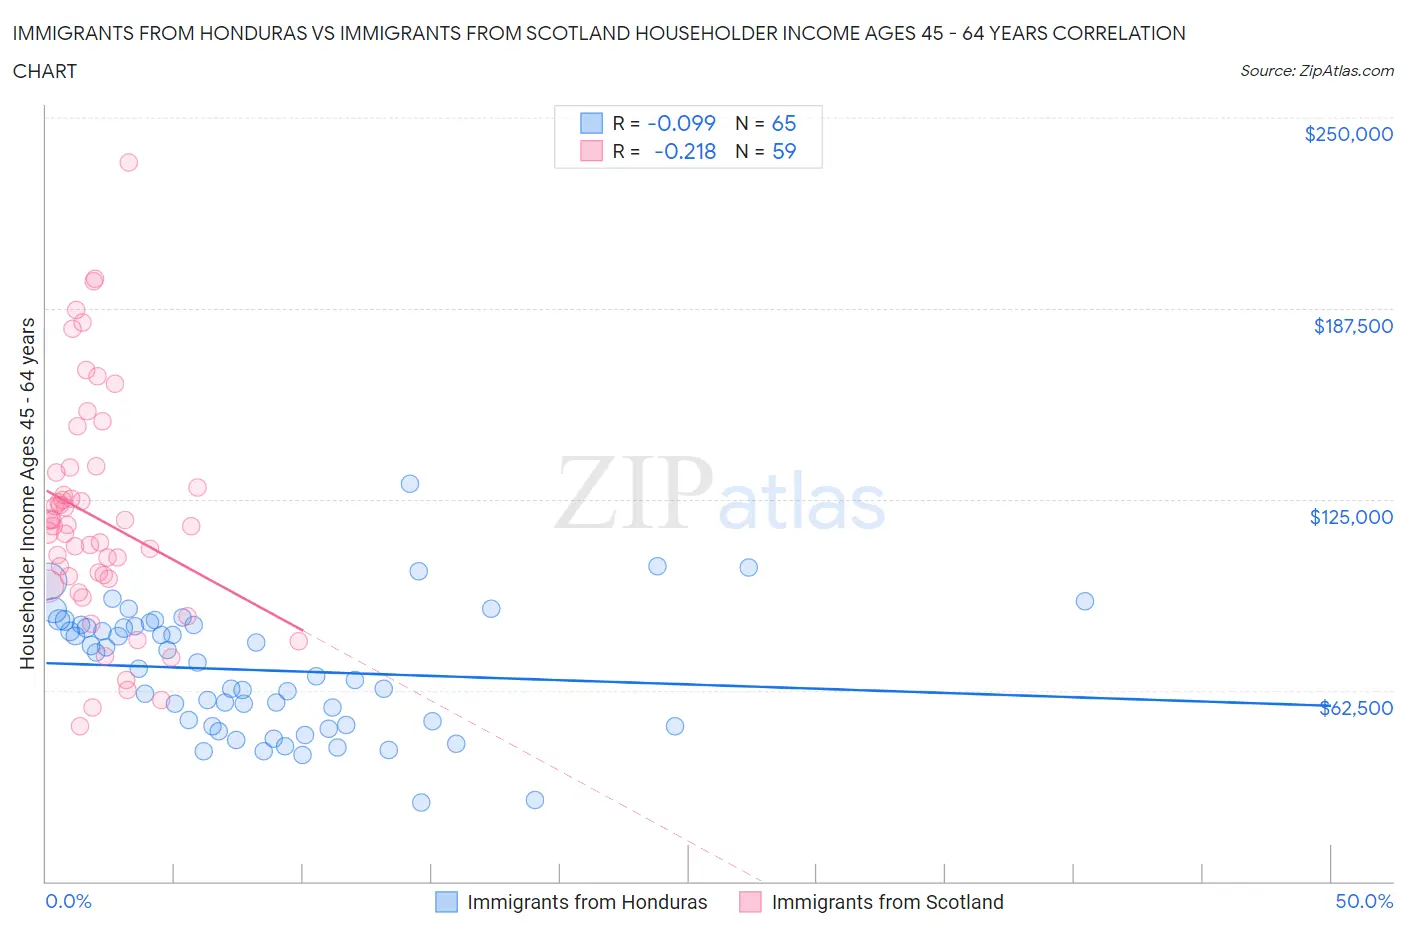 Immigrants from Honduras vs Immigrants from Scotland Householder Income Ages 45 - 64 years